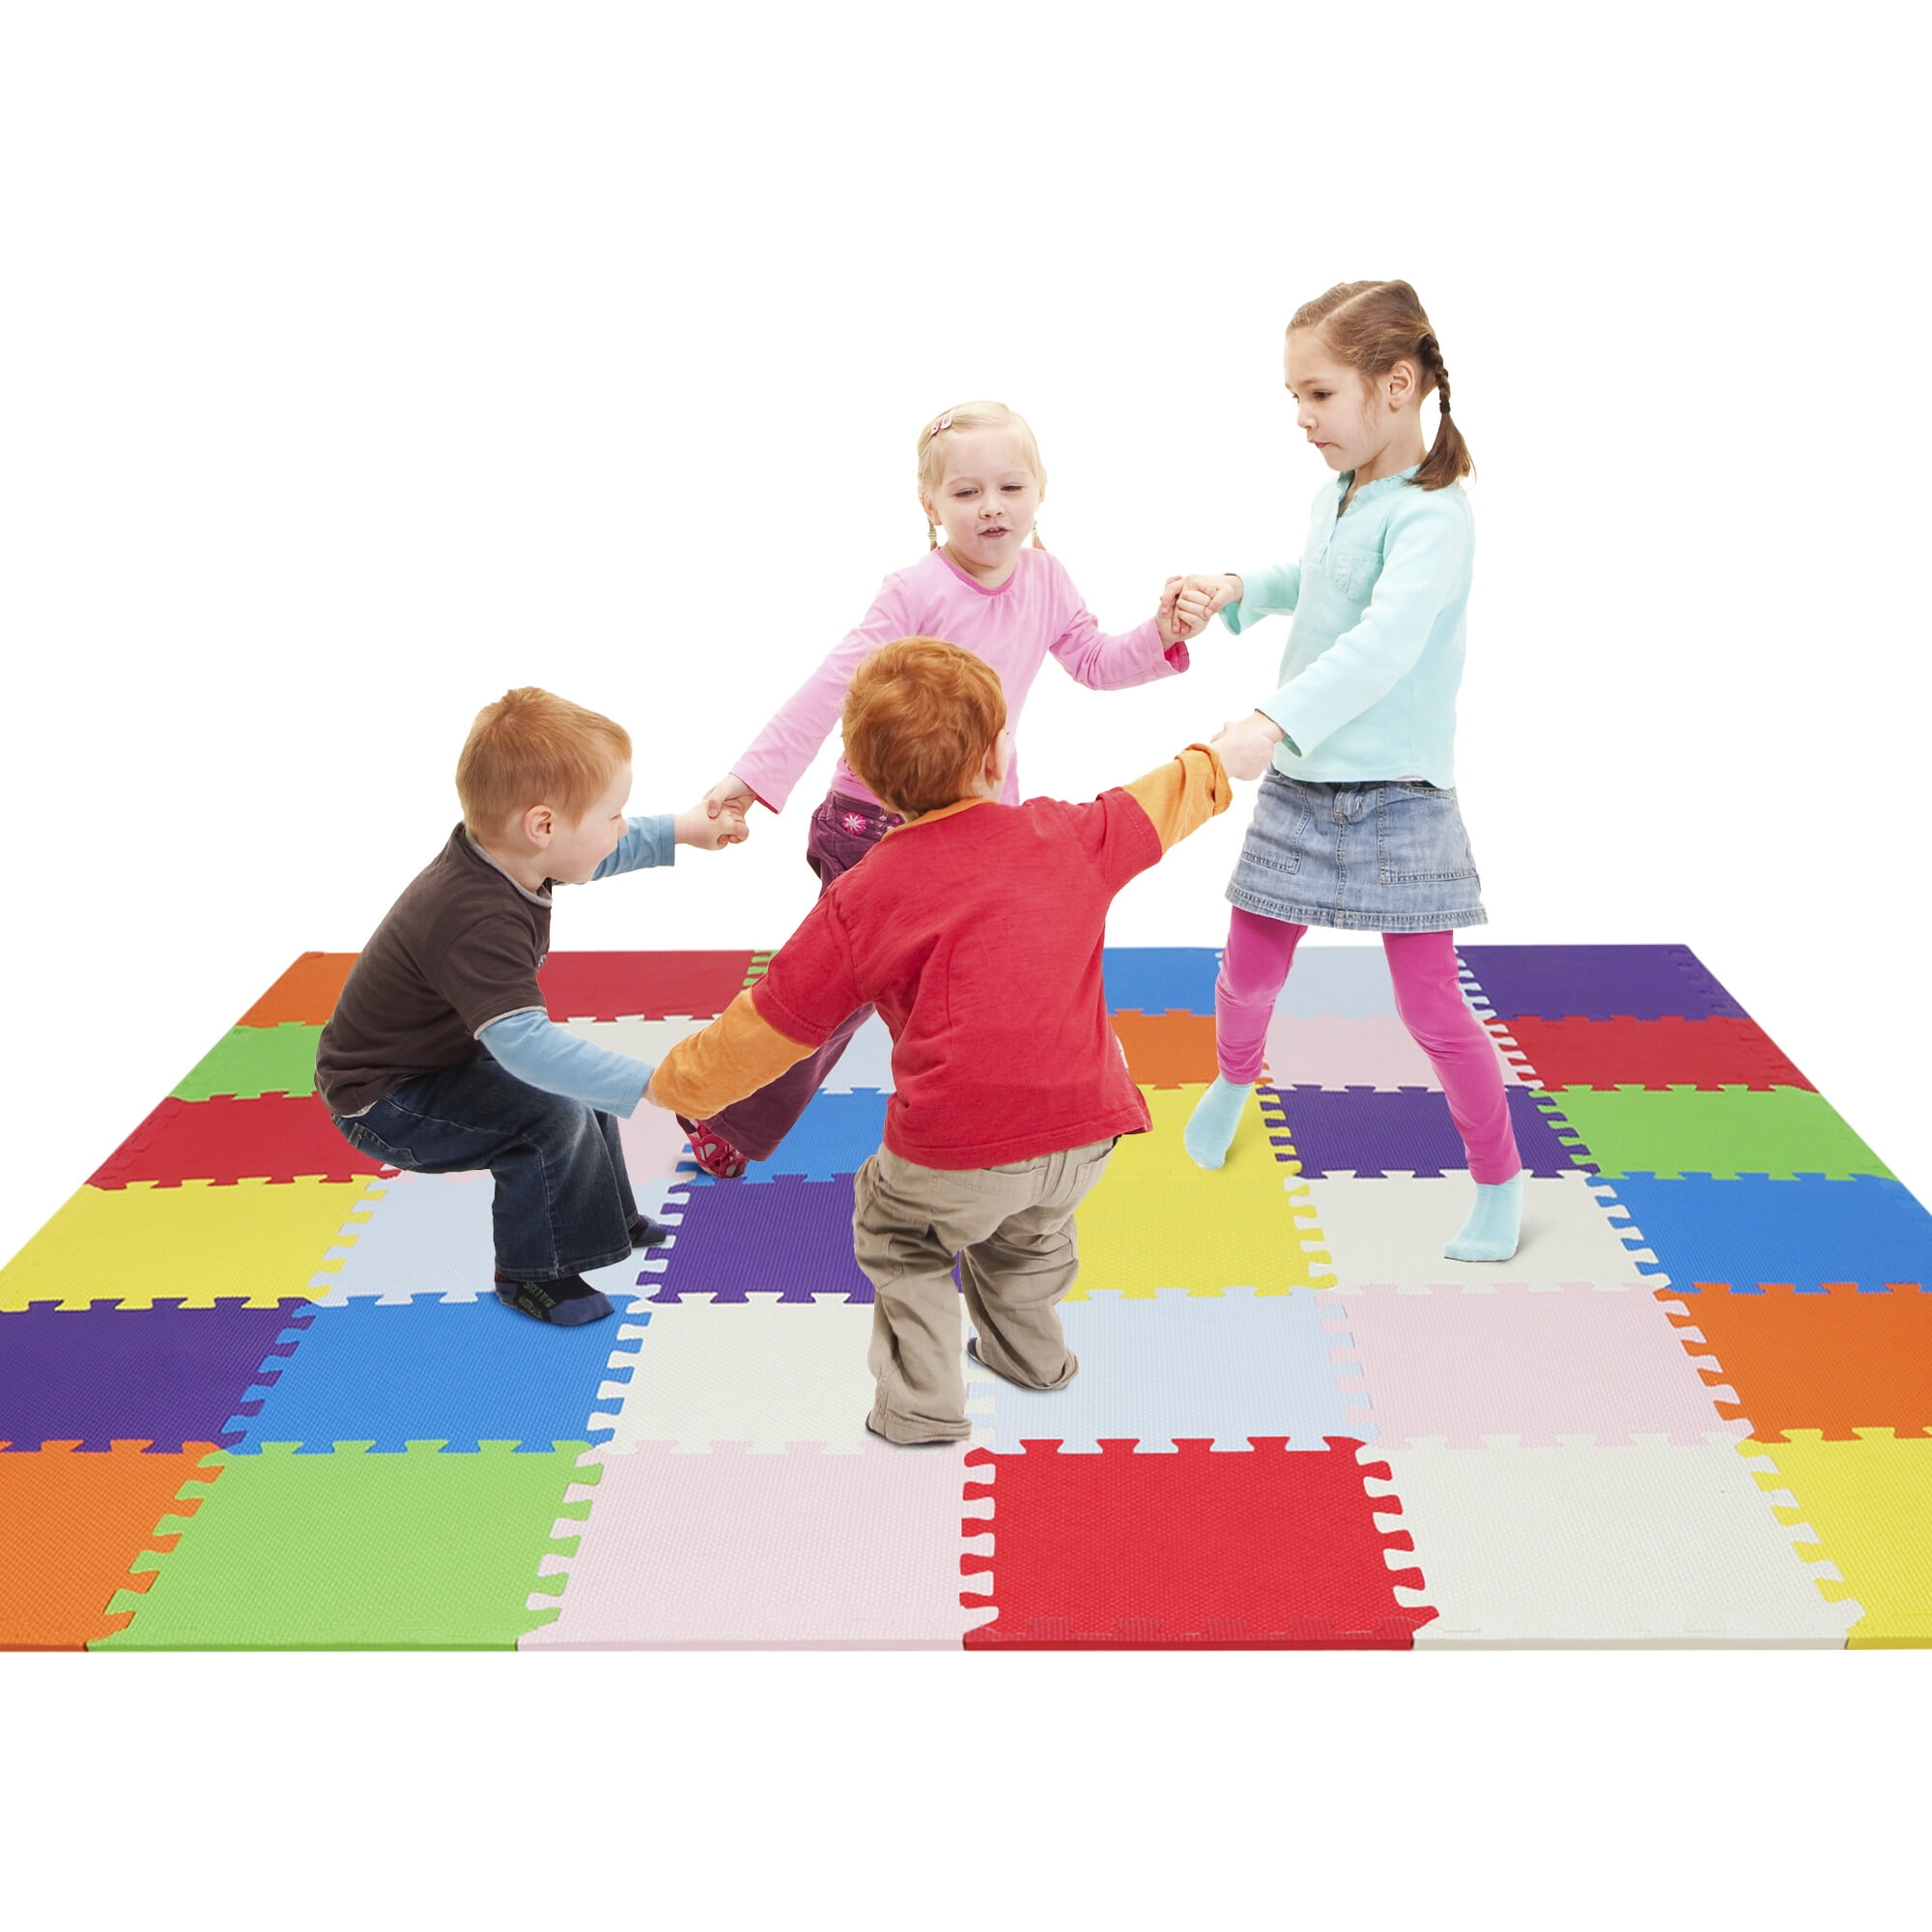 10pcs Children's Developing Crawling Rugs Baby Play Puzzle Foam Mat Pad Floor 